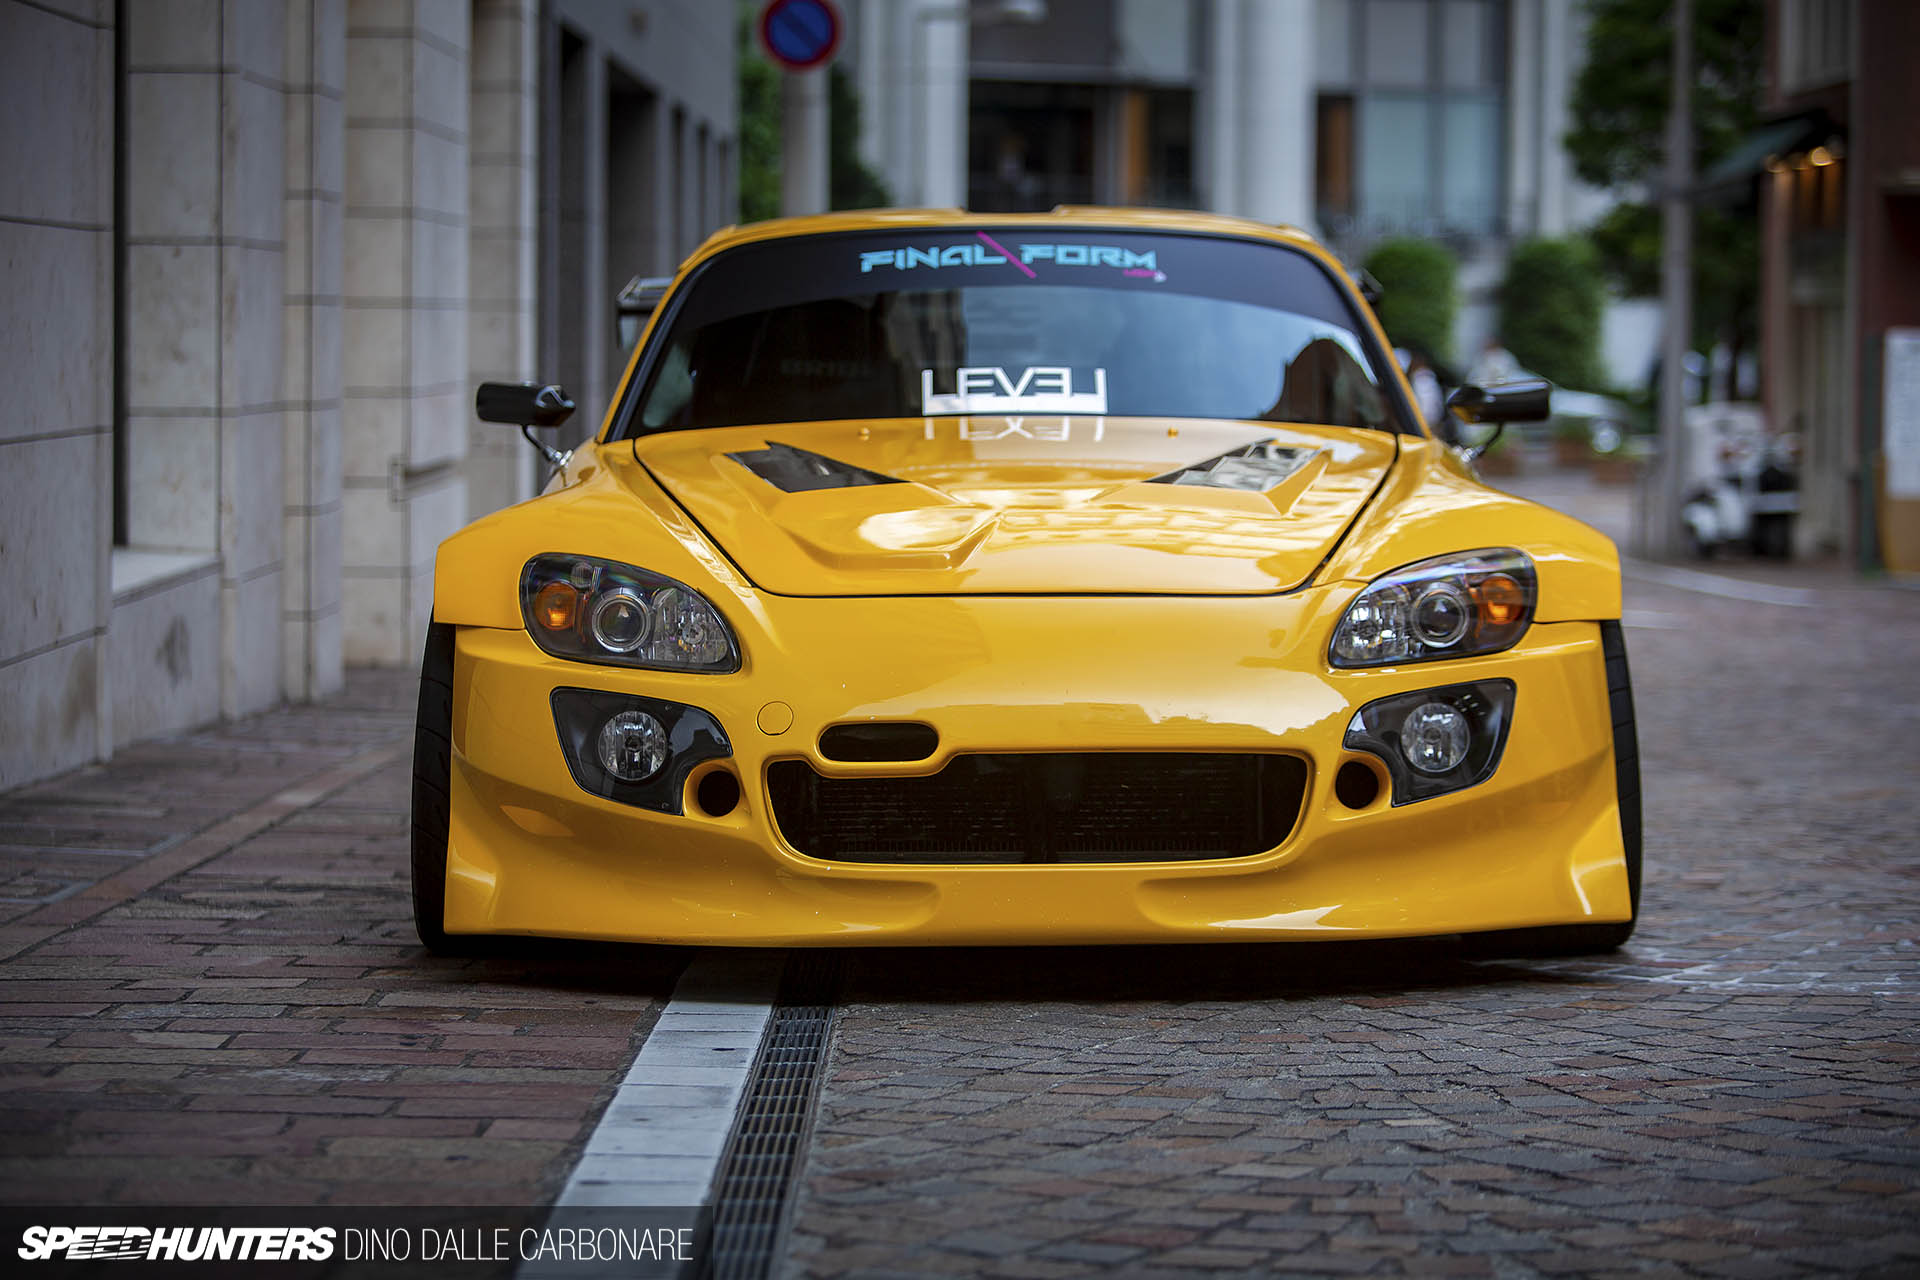 Why You Should Buy A Honda S00 Speedhunters